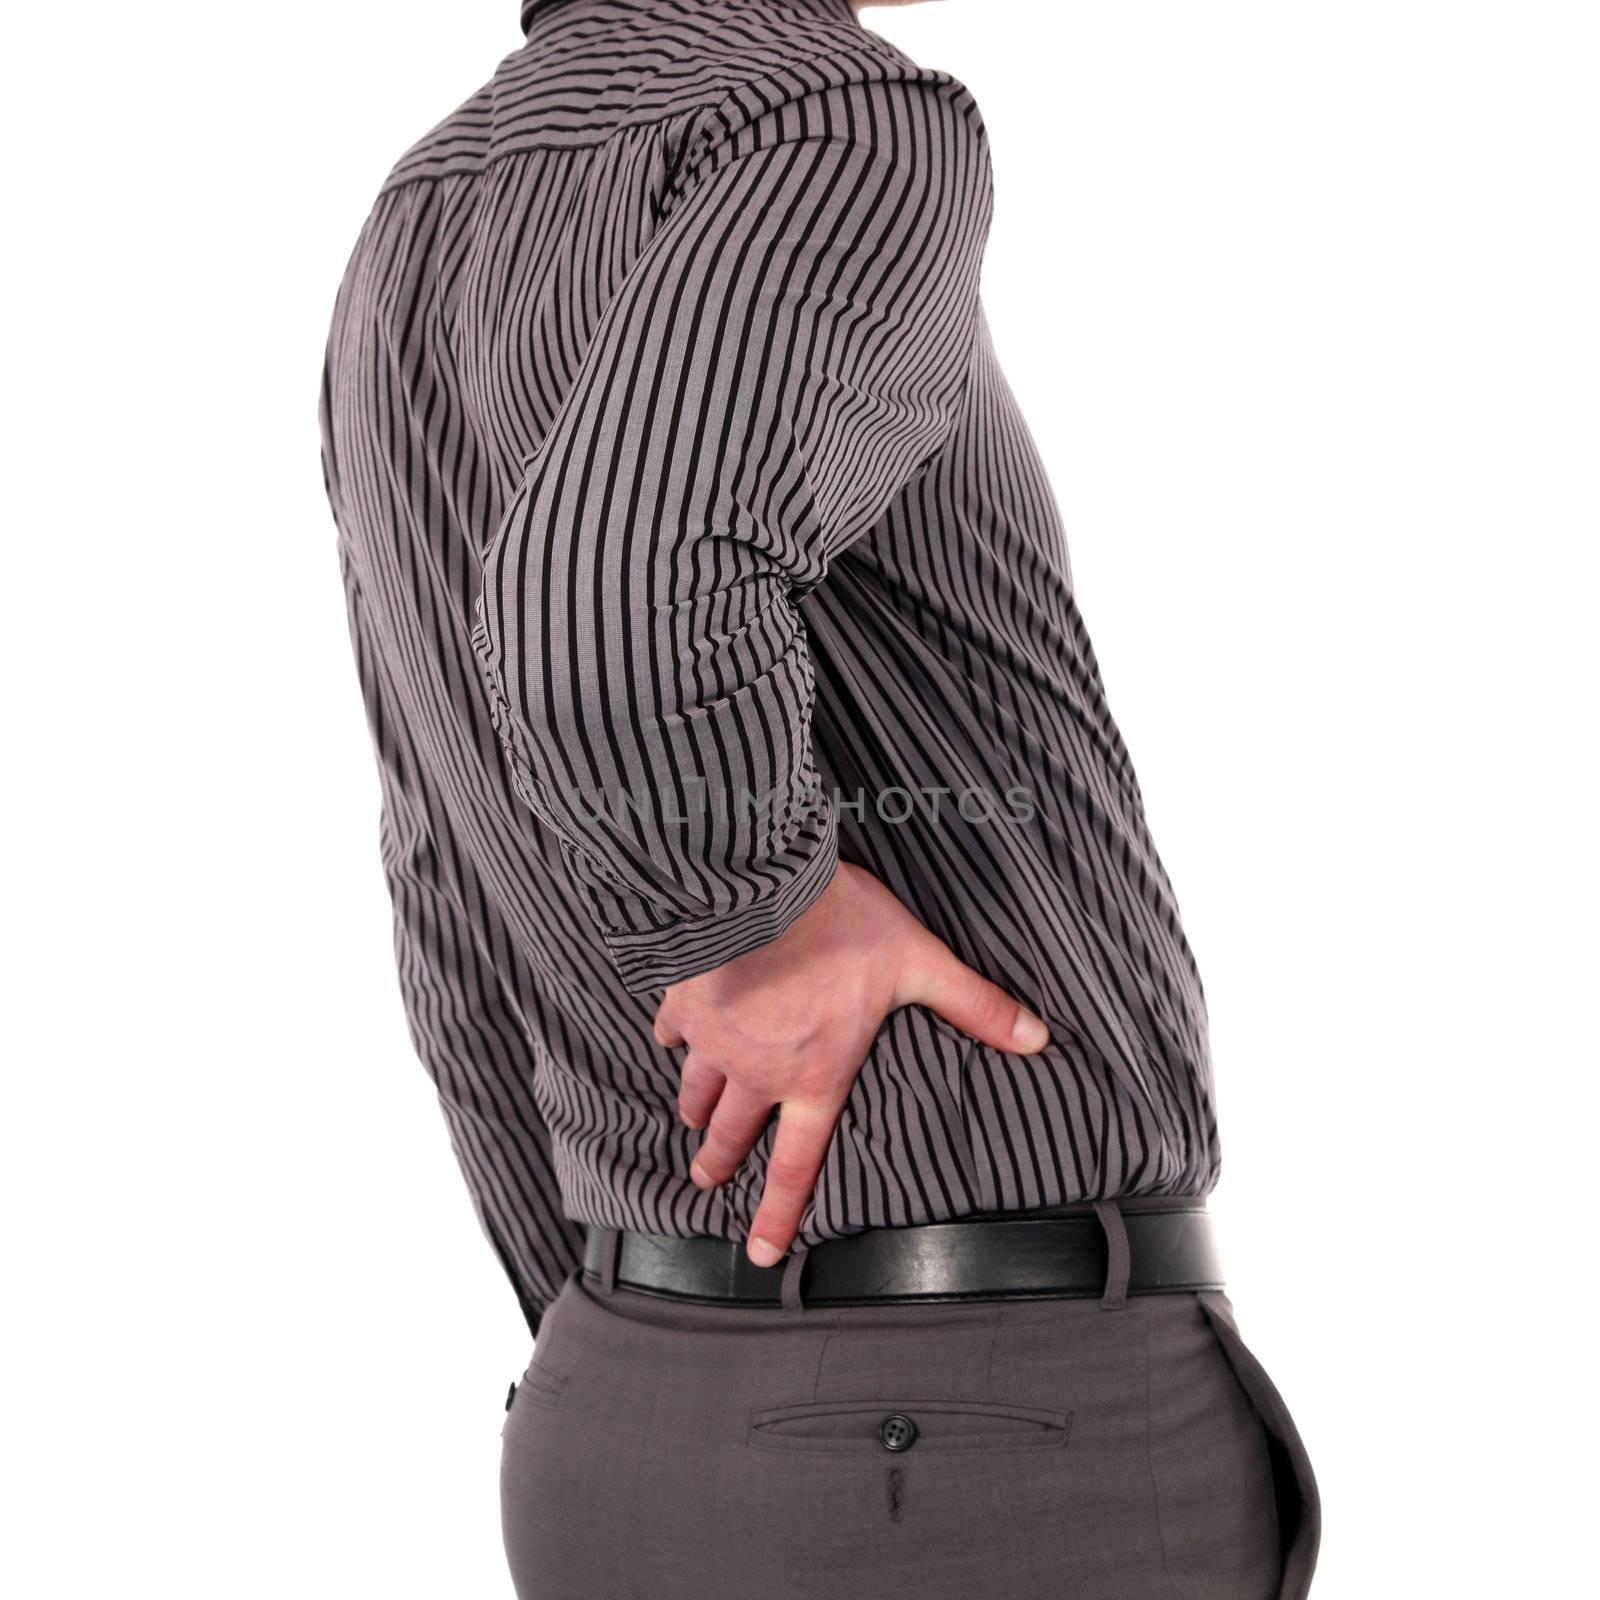 Man with back pain holding his lower back with his hand, torso portrait isolated on white